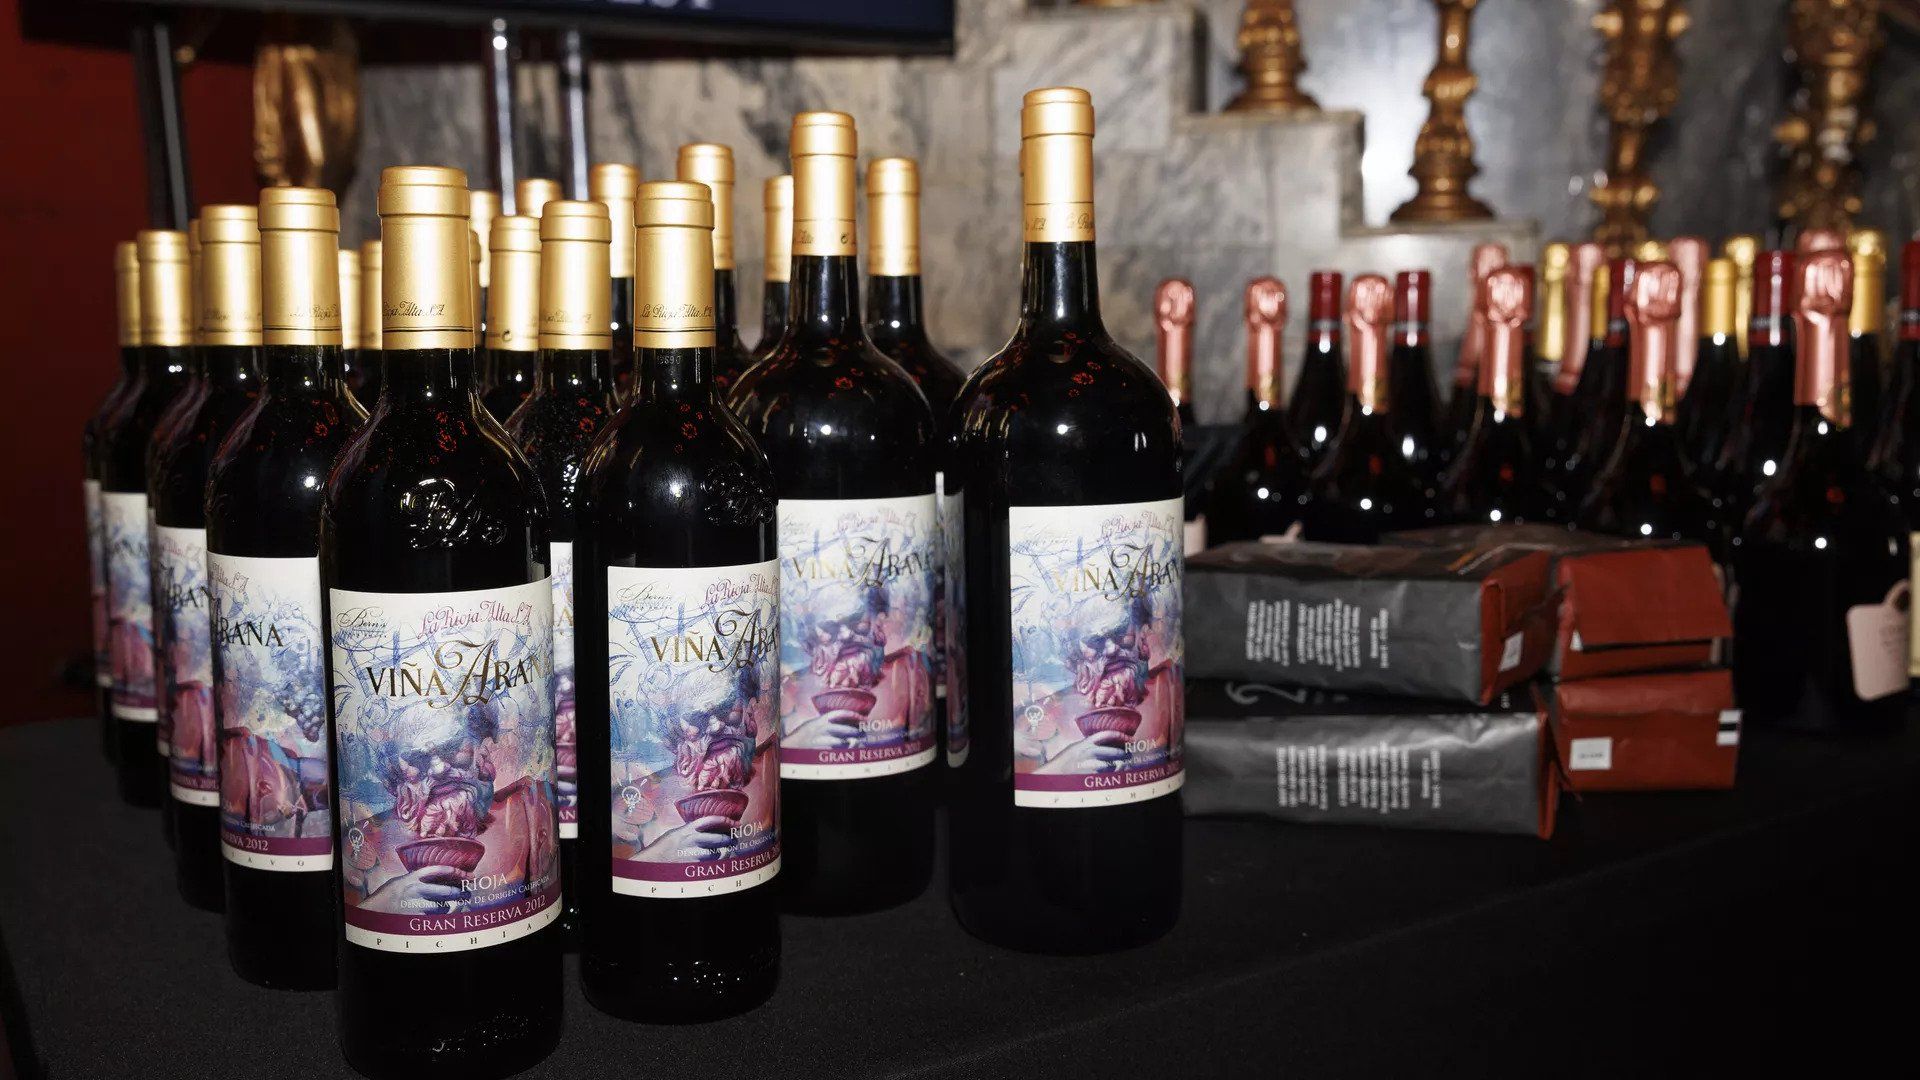 bottles of Bern's new wine with art on the label